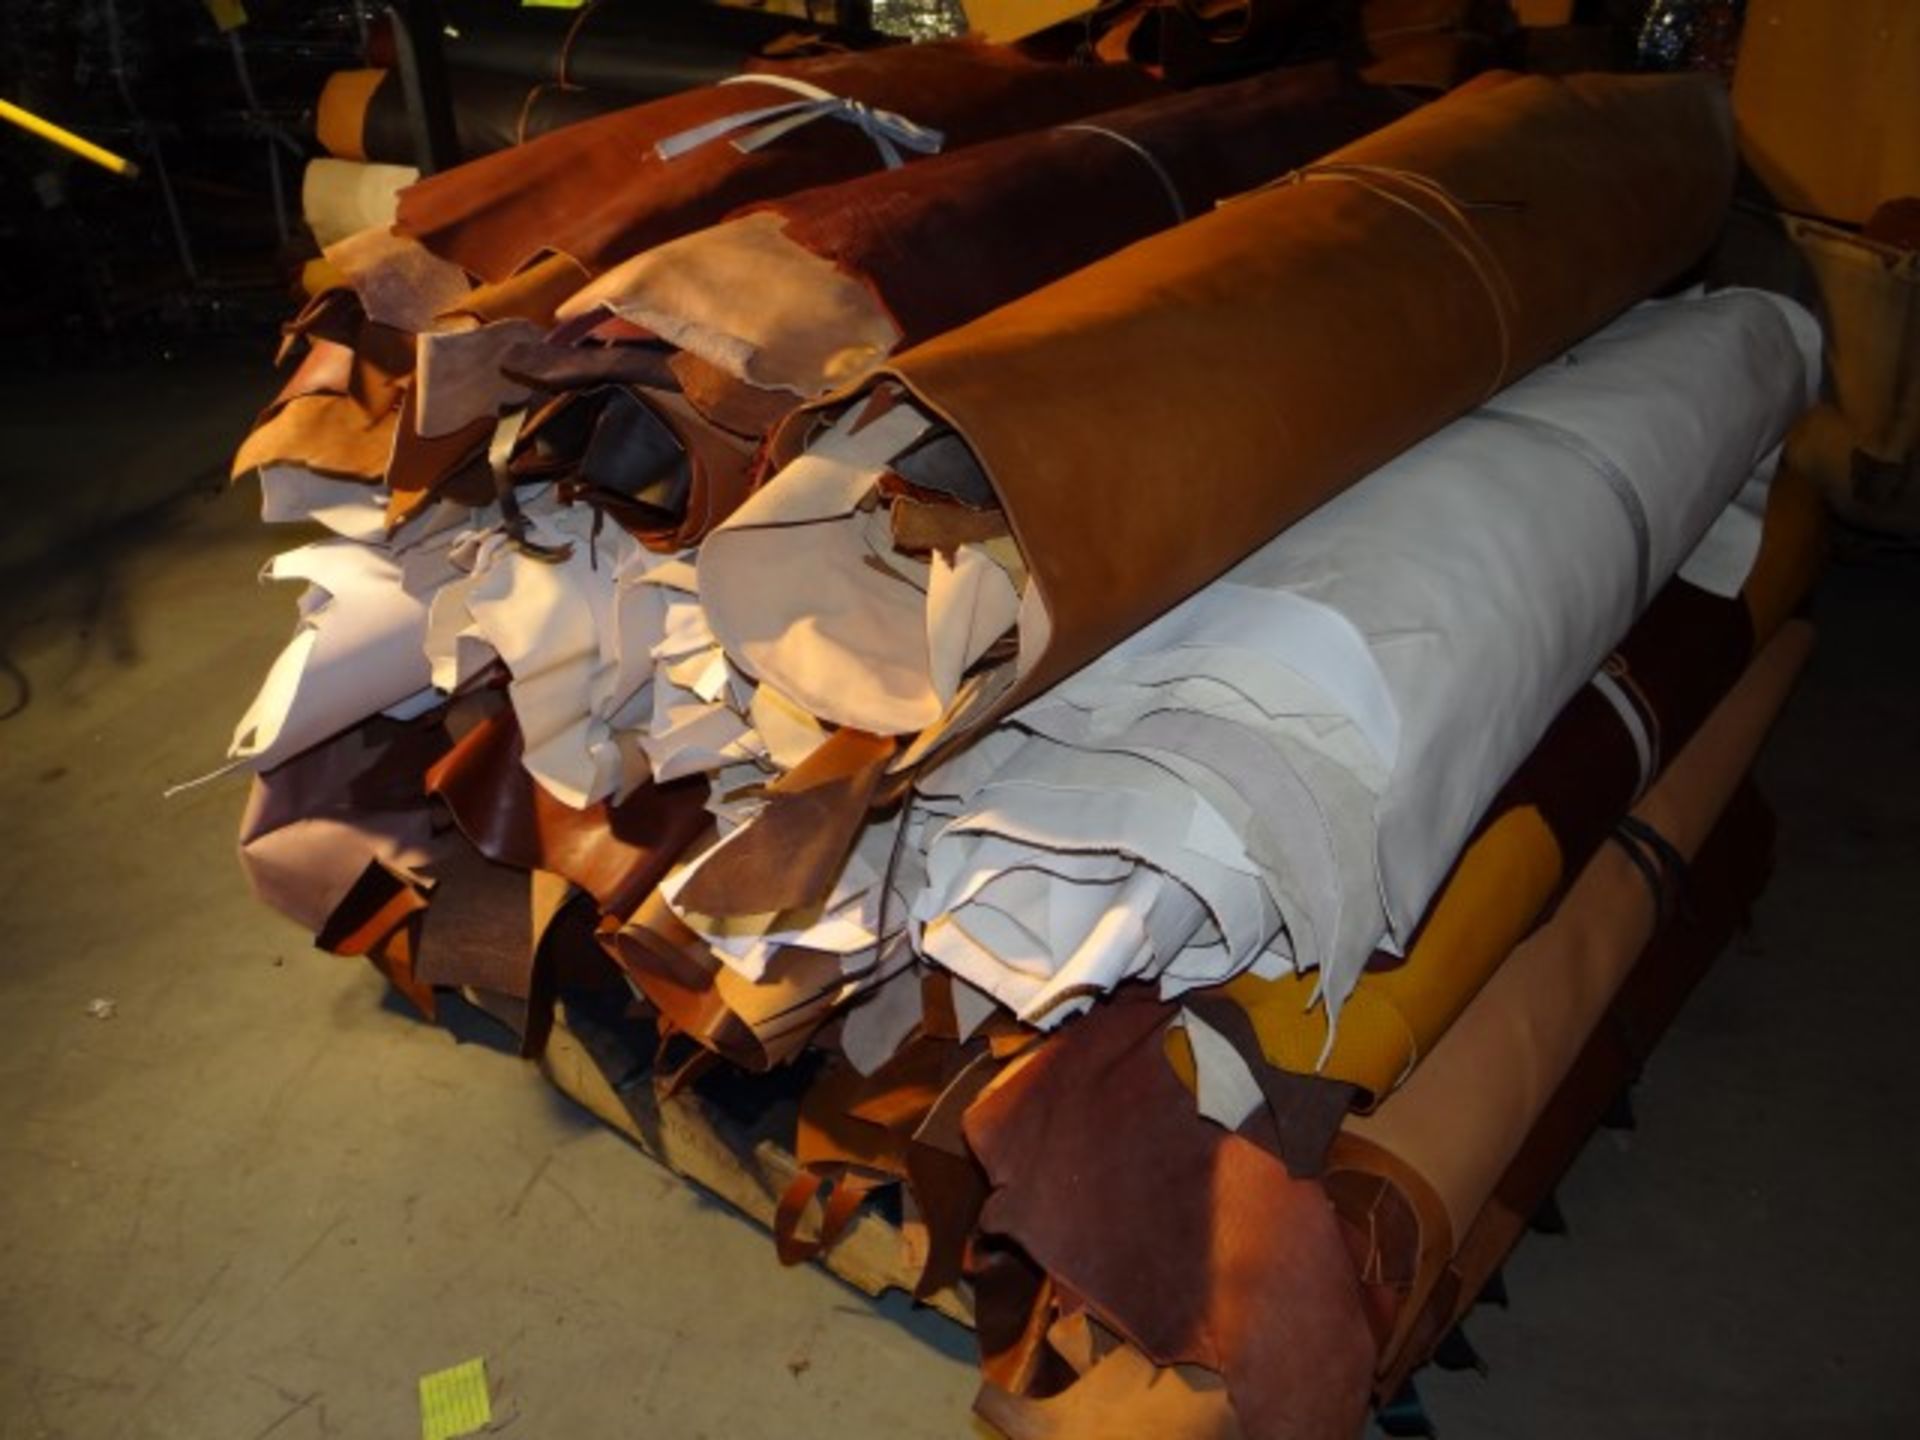 (600) Pounds of Leather. Assorted Colors and Thicknesses. Each Piece is at least 10 Sq.Ft. - Image 4 of 4